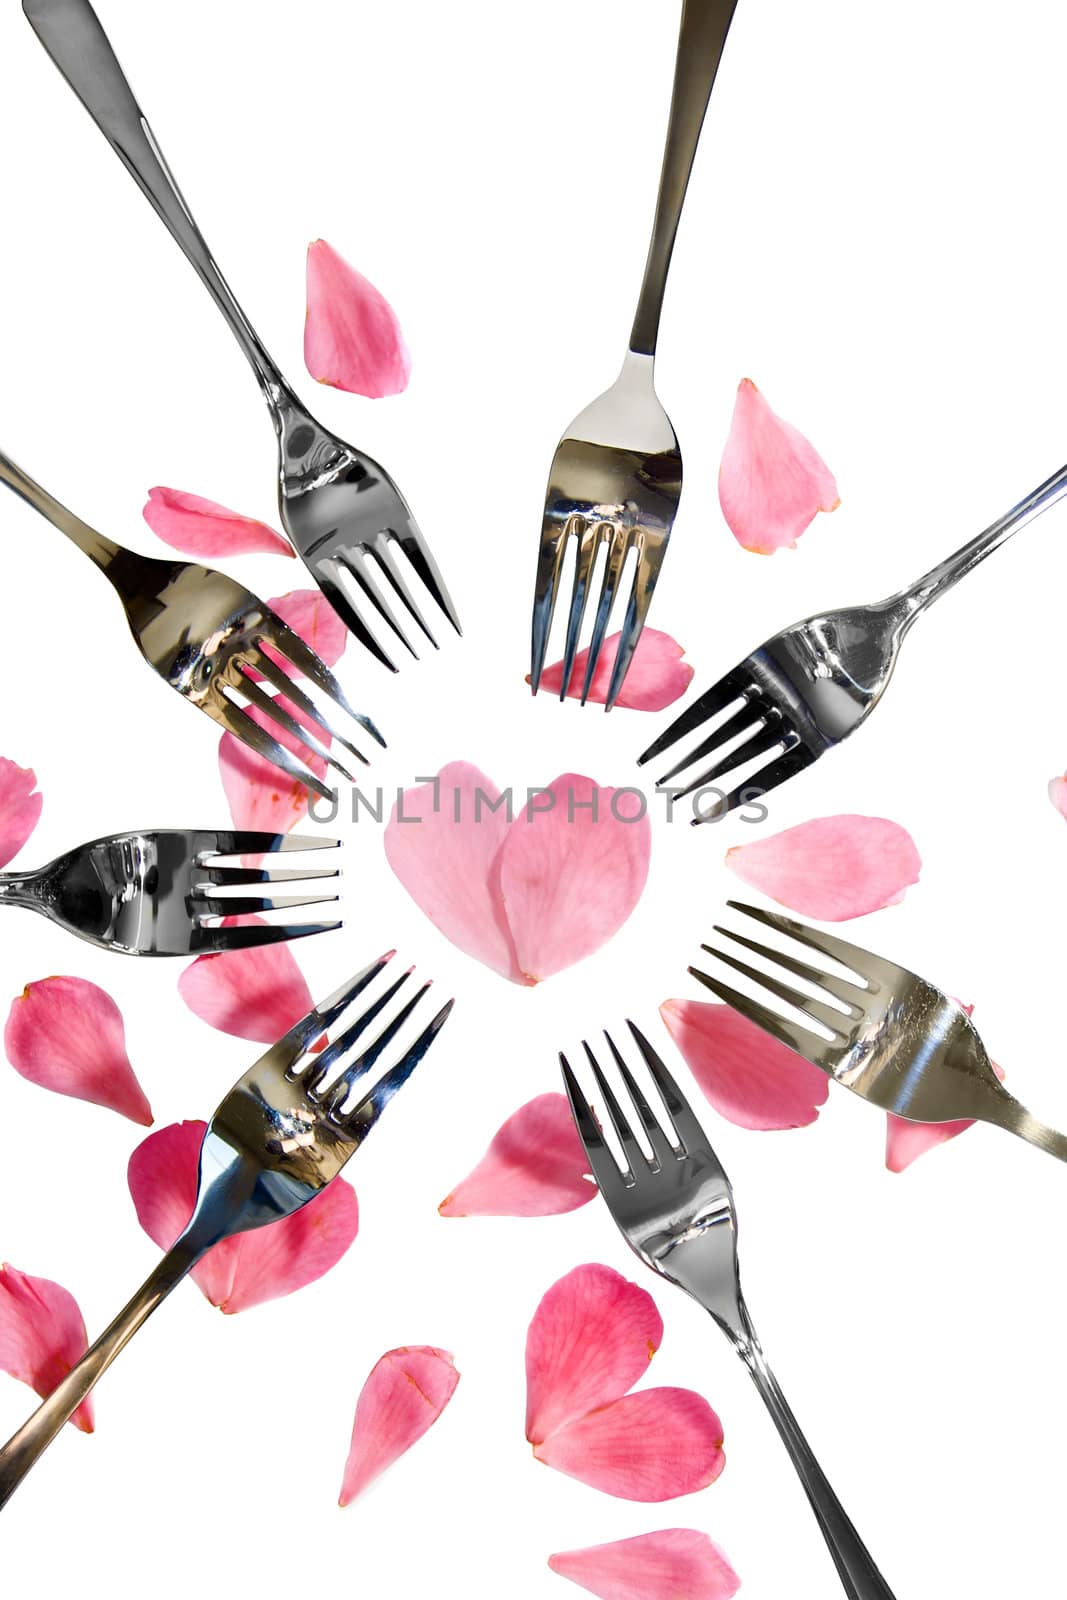 forks surrounding a heart shape petal with rose petals for a concept on romantic dining on white background